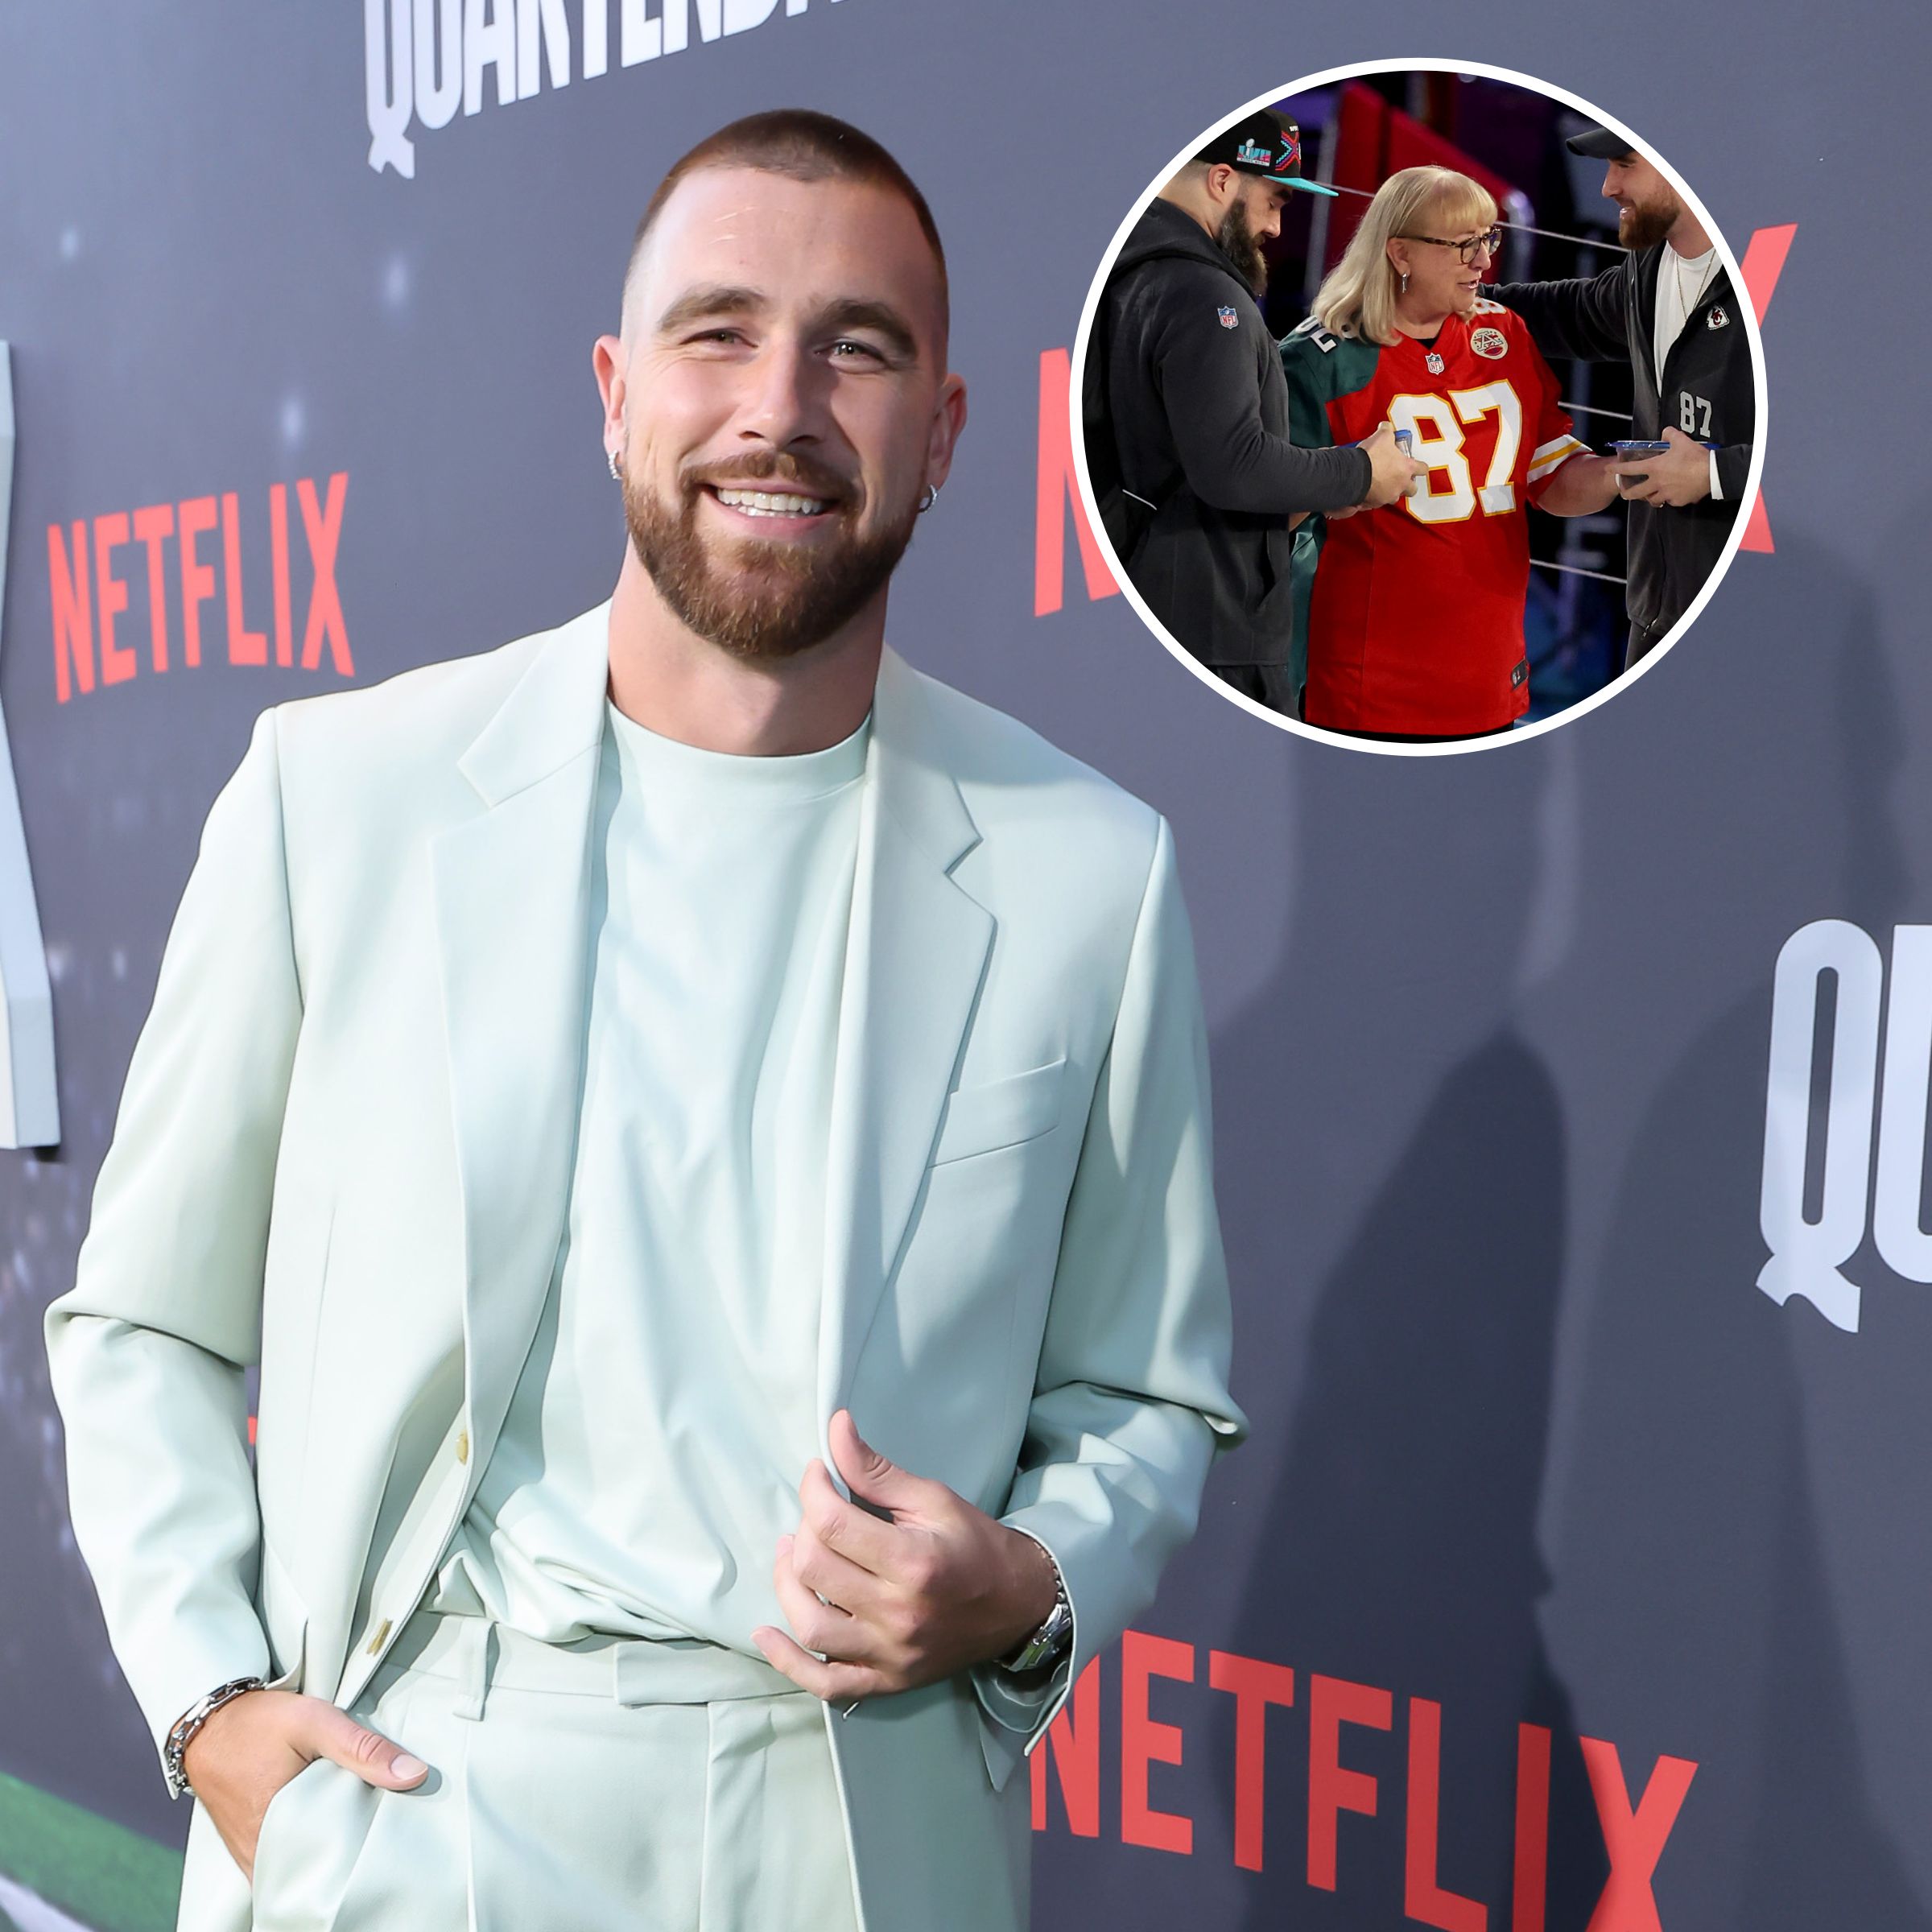 While Travis Kelce might be most recognizable wearing his number